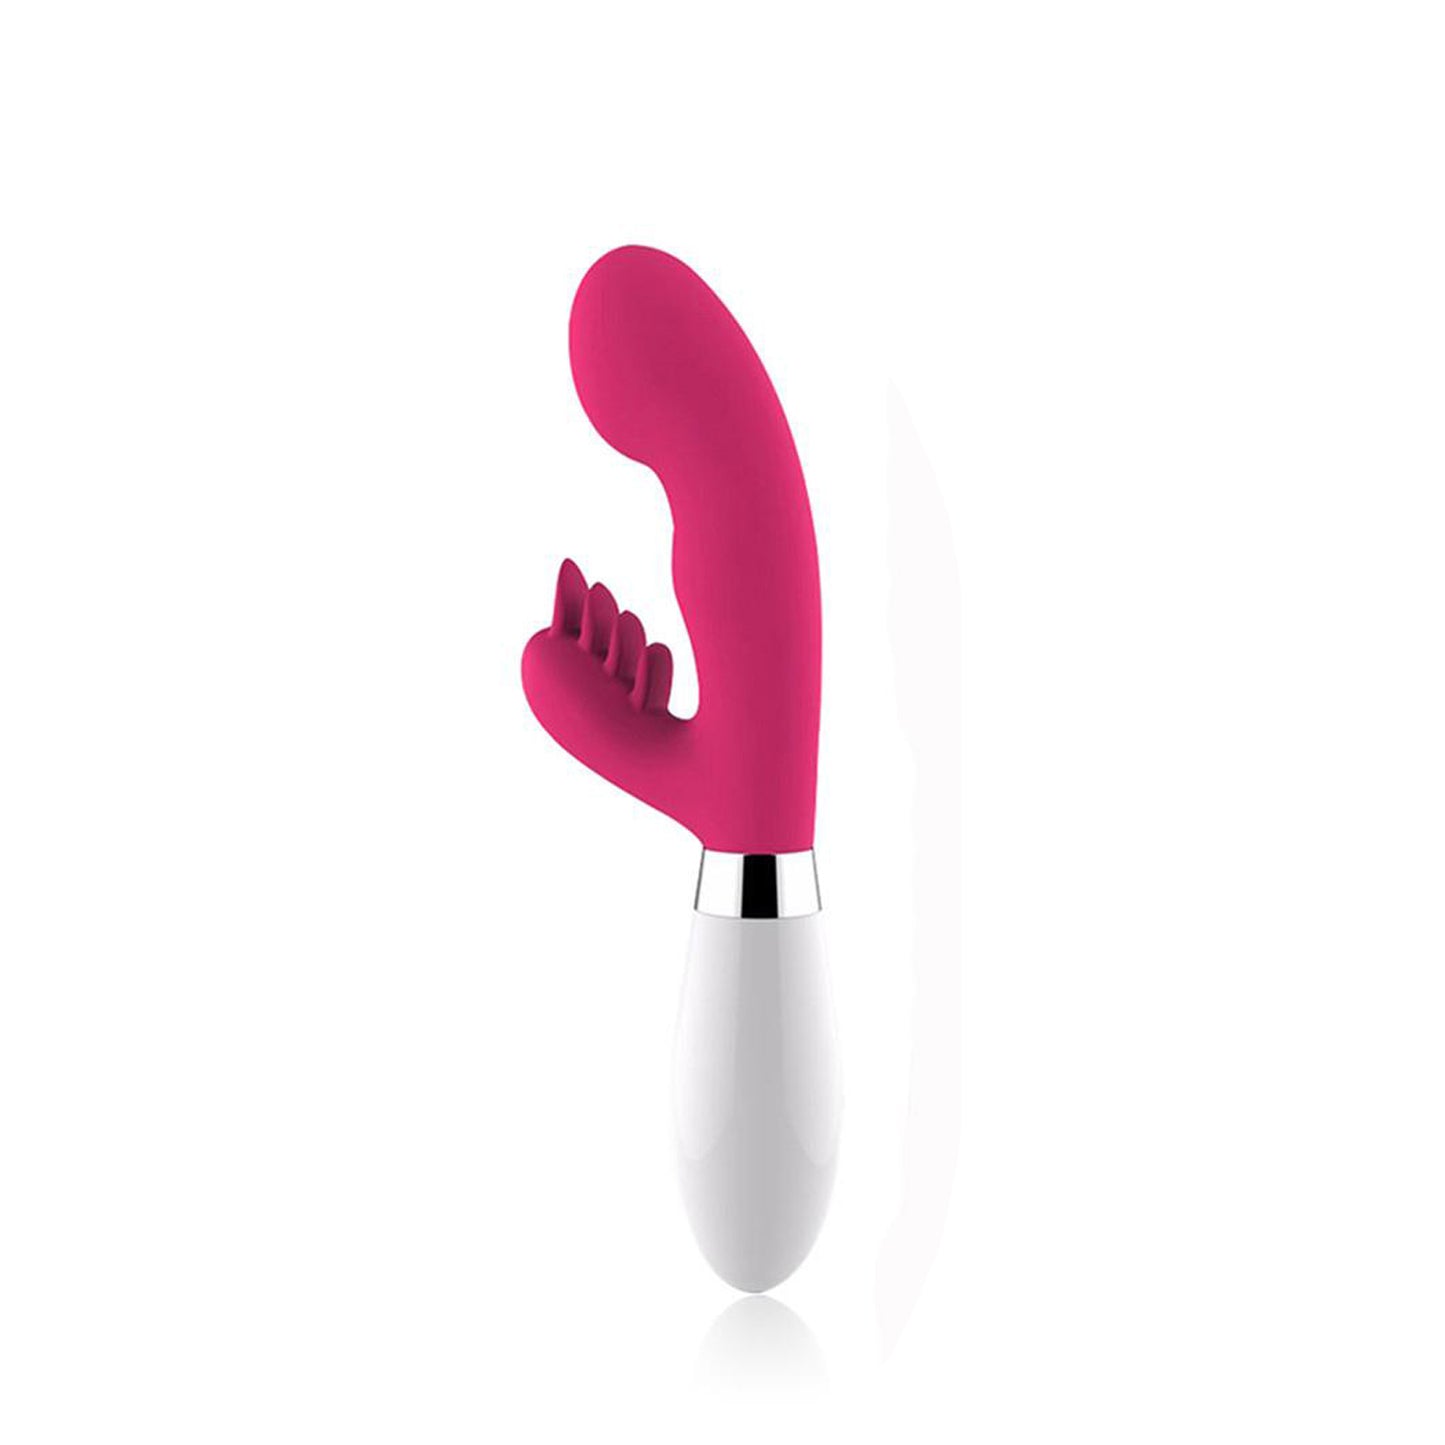 Hot Brand High Quality Wireless Vibrator Fashion Style Comfortable Soft Sex Products Toys for Lover